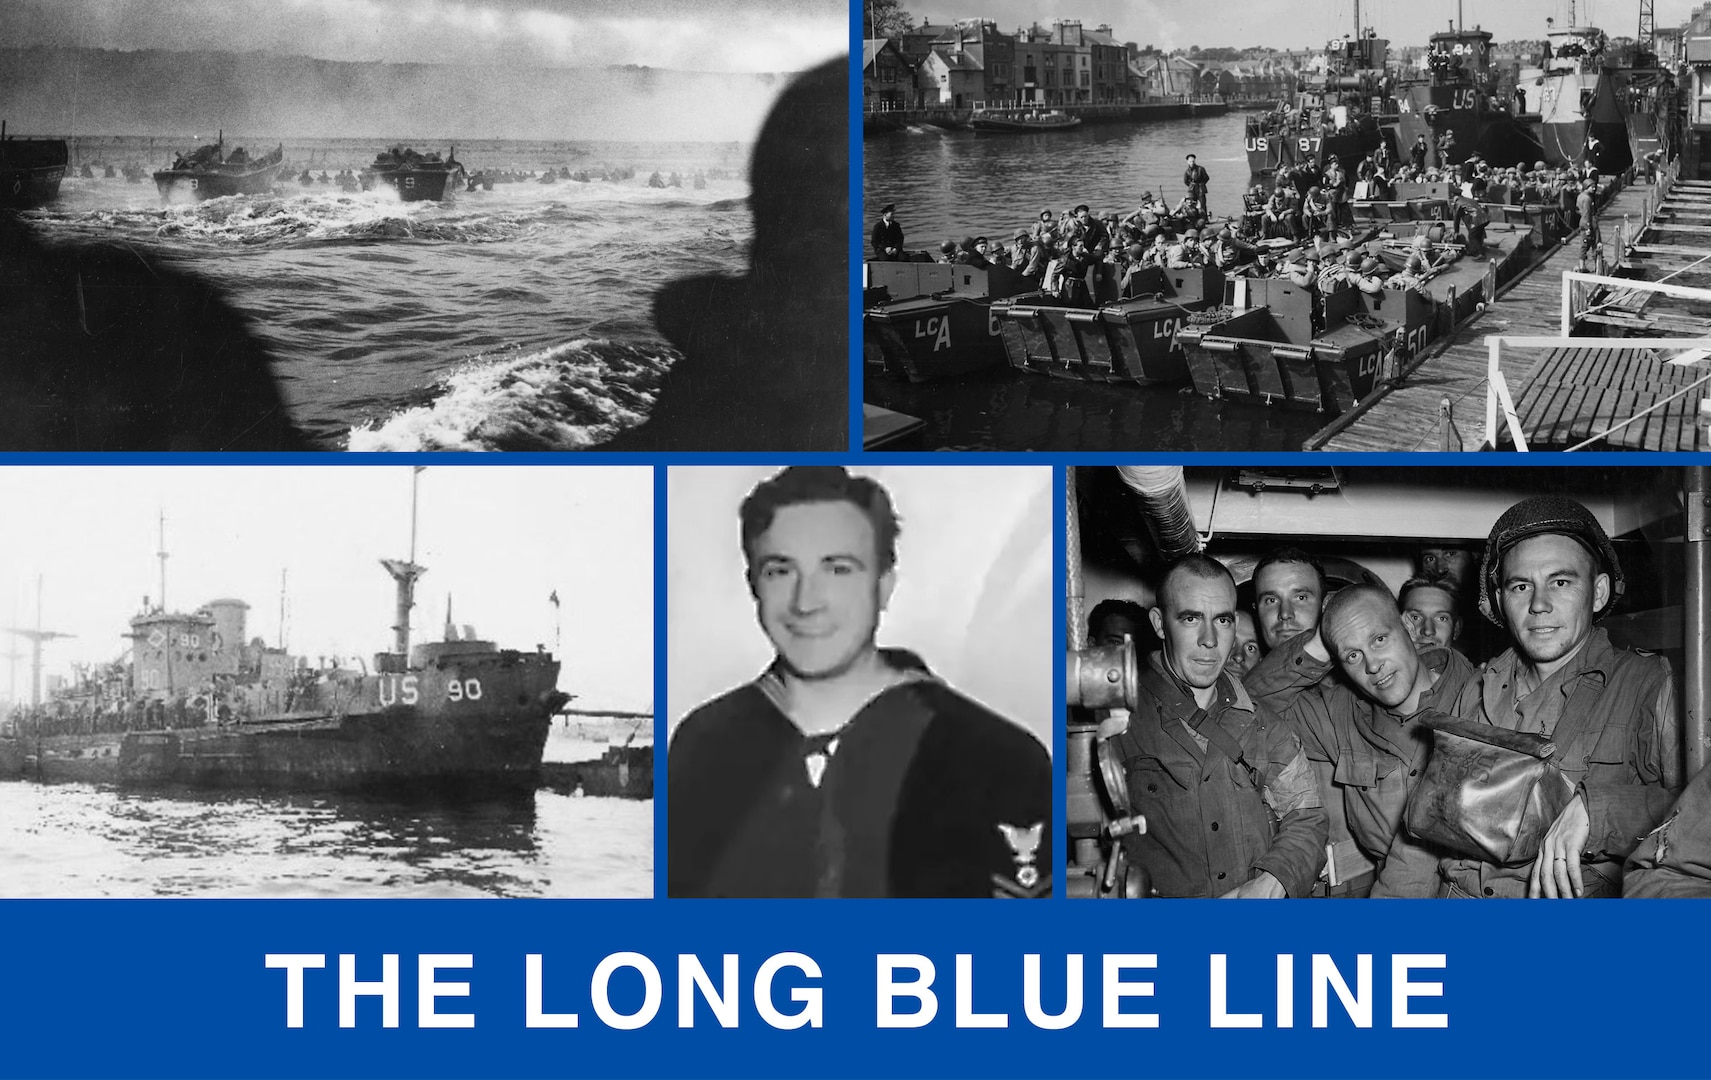 5 photos of various CG members and boats compiled into a graphical representation of the events. Text on the bottom of the photo says "The Long Blue Line"